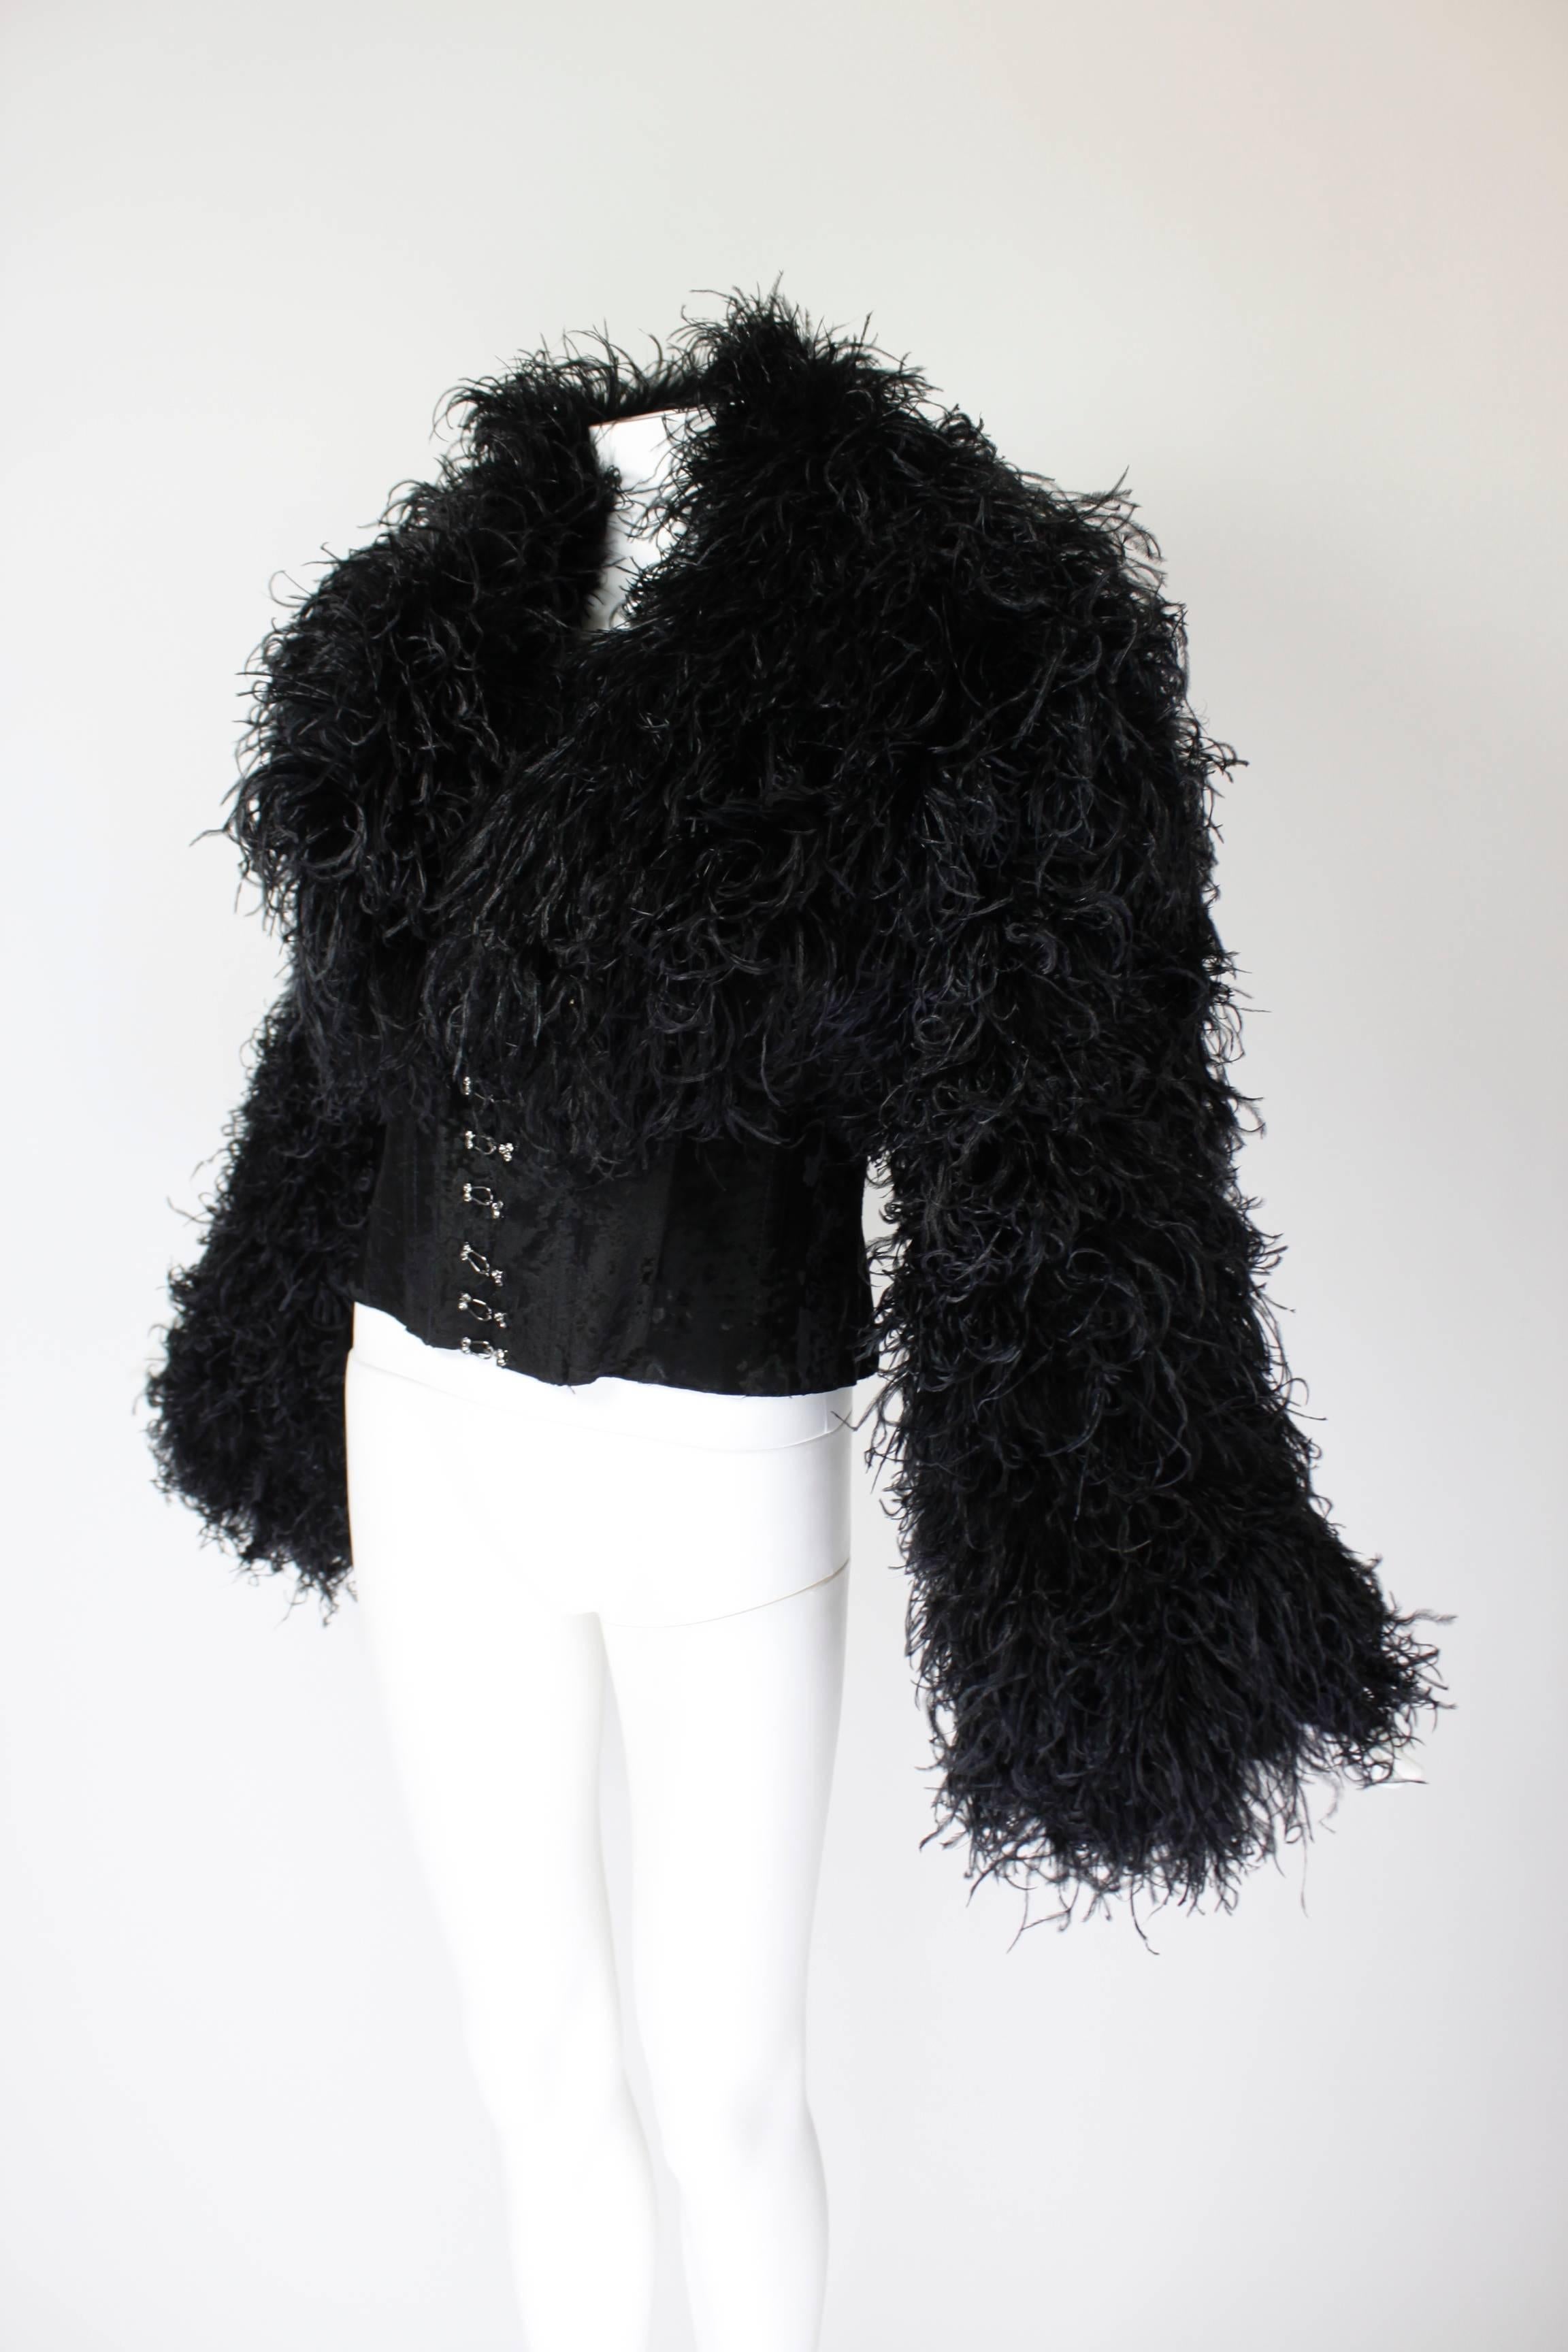 Black 1990s Curled Ostrich Feather Cropped Jacket with Rhinestone Closure